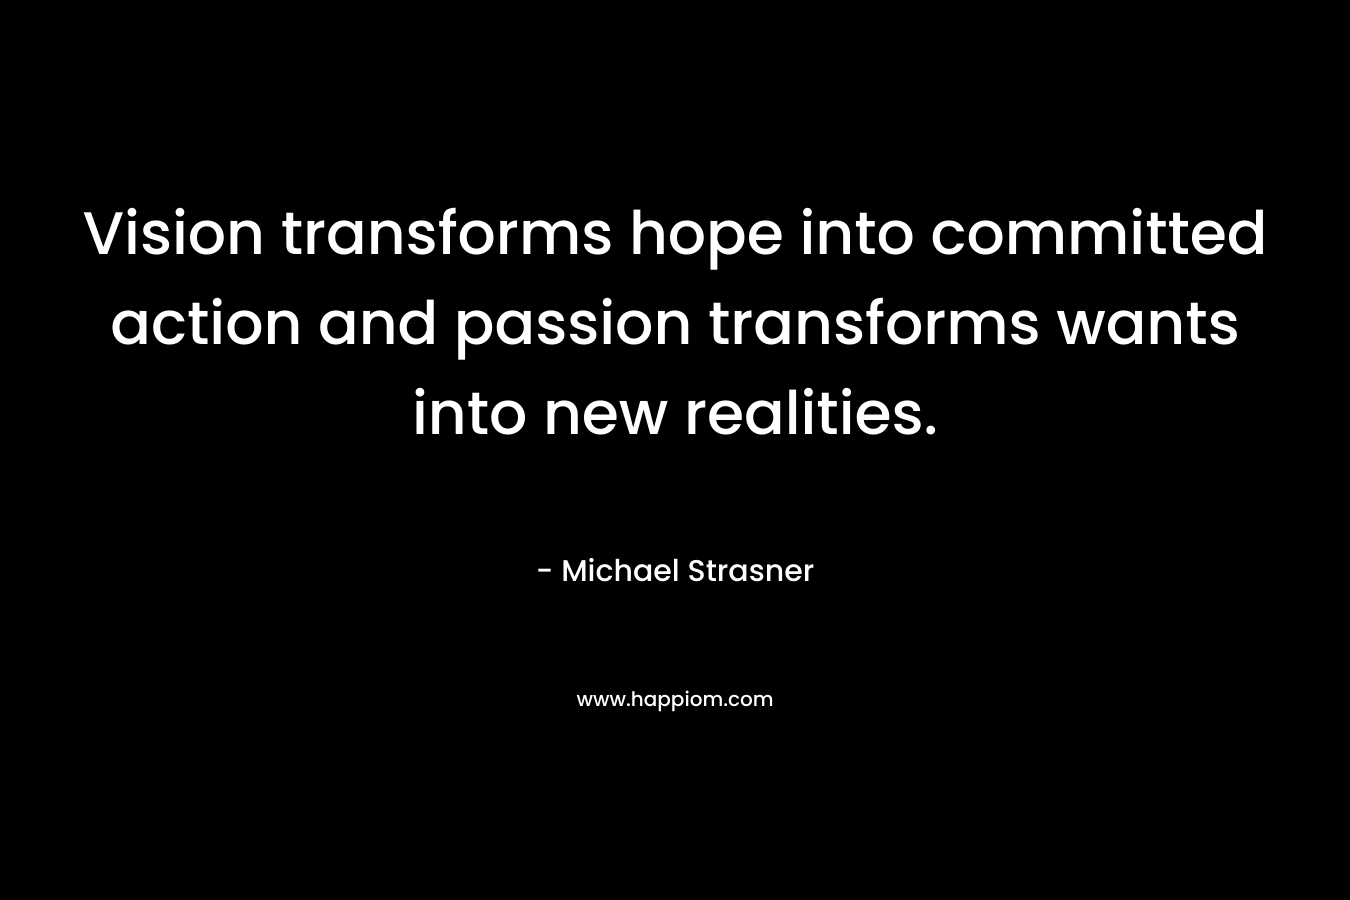 Vision transforms hope into committed action and passion transforms wants into new realities.